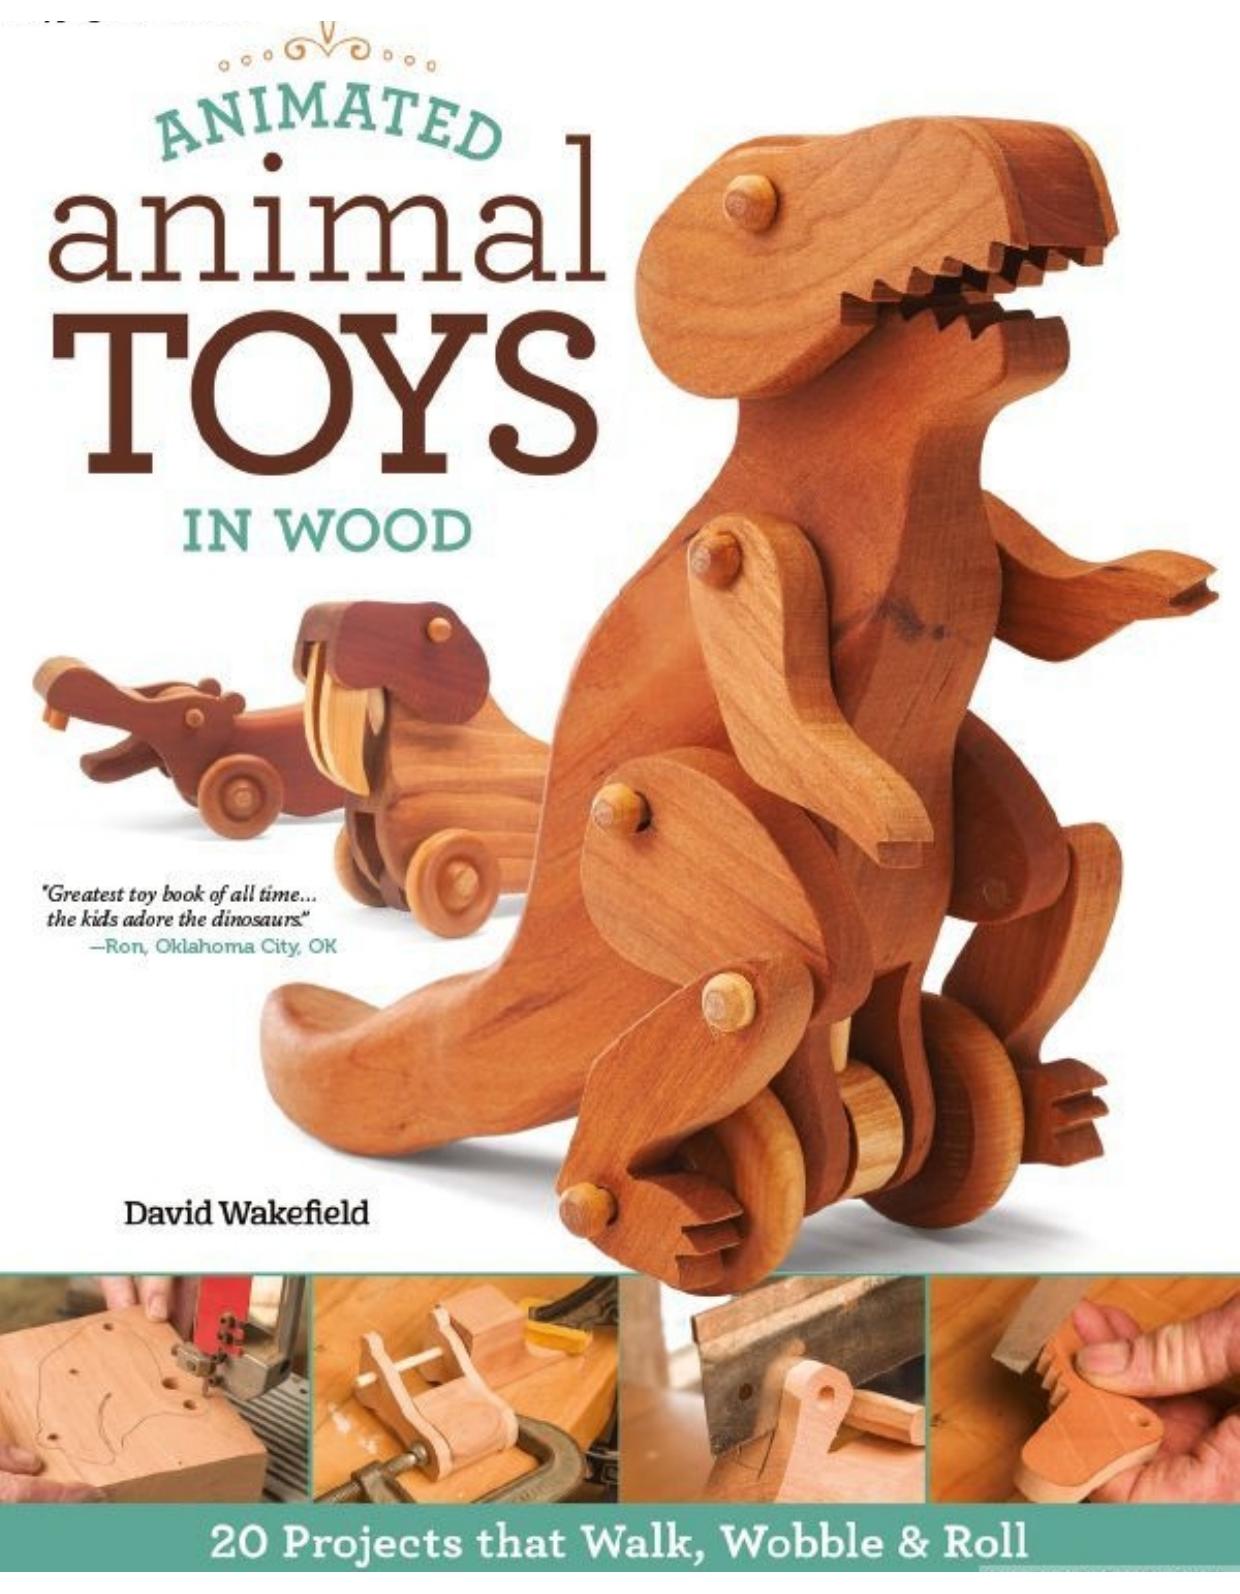 Animated Animal Toys In Wood - 20 Projects That Walk by Wobble & Roll